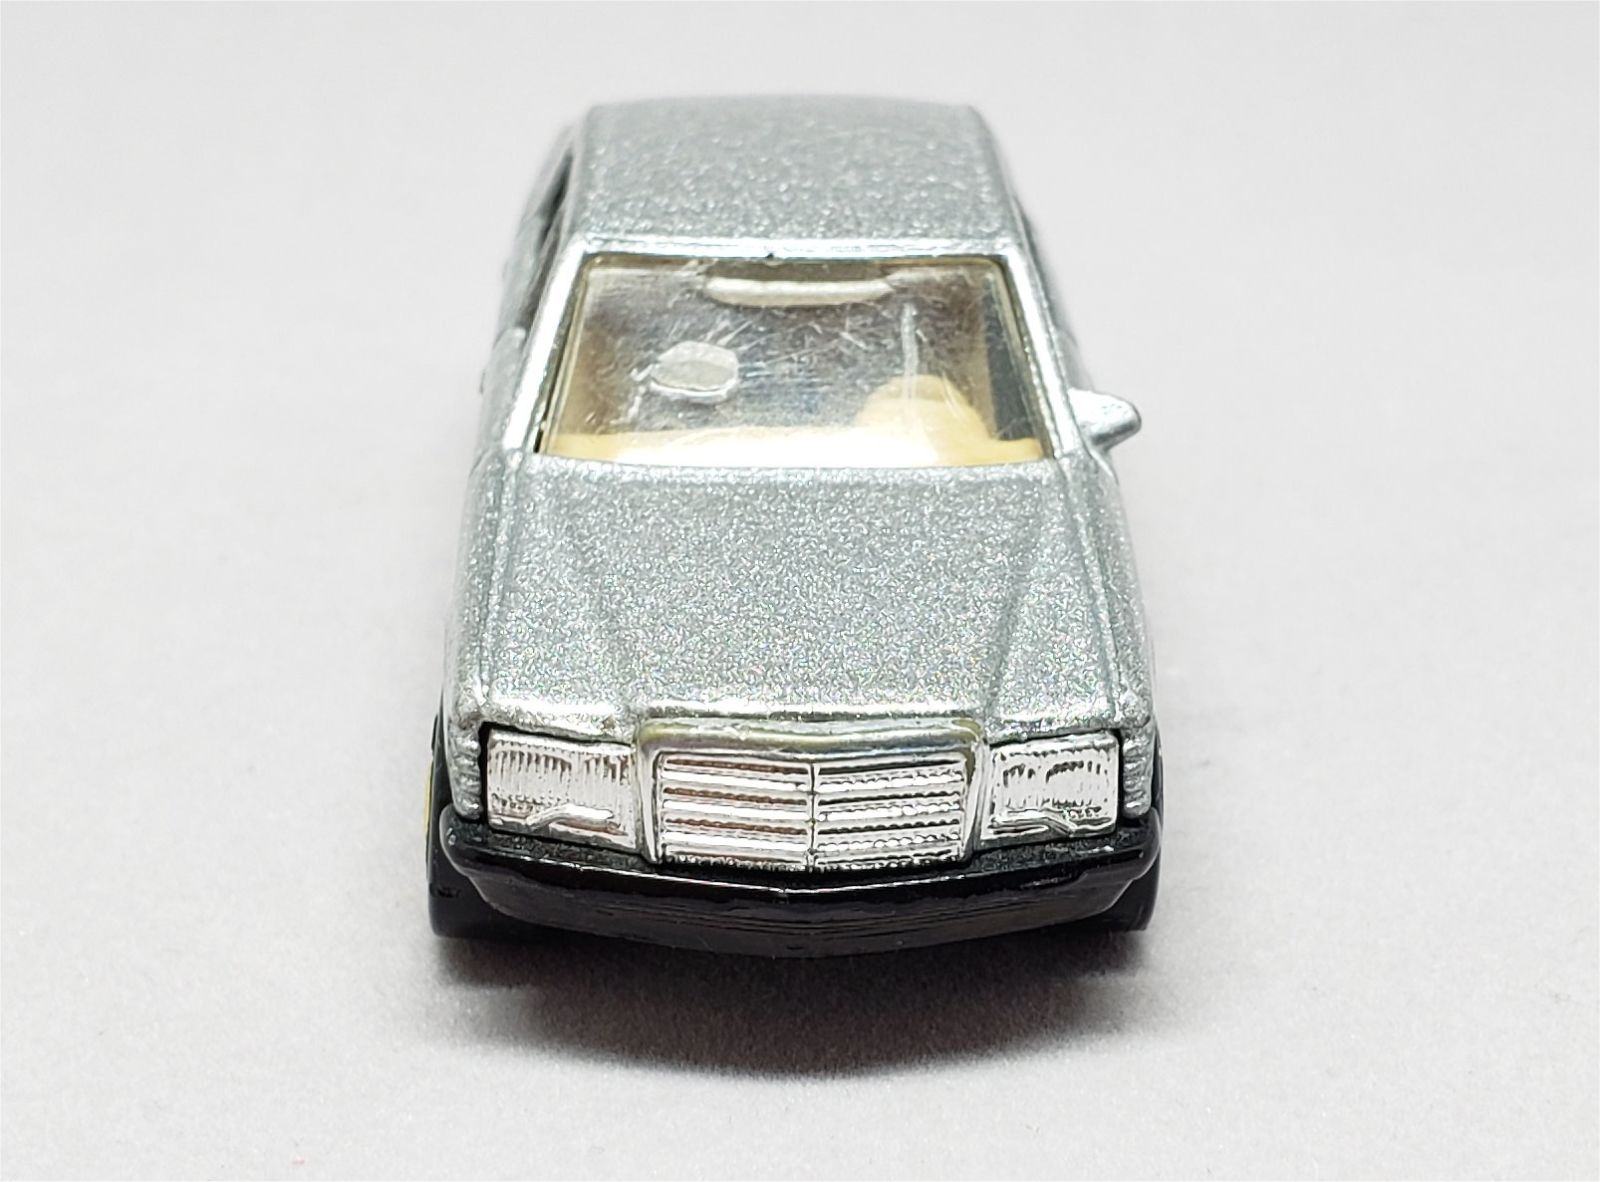 Illustration for article titled [REVIEW] Hot Wheels Mercedes-Benz 380 SEL